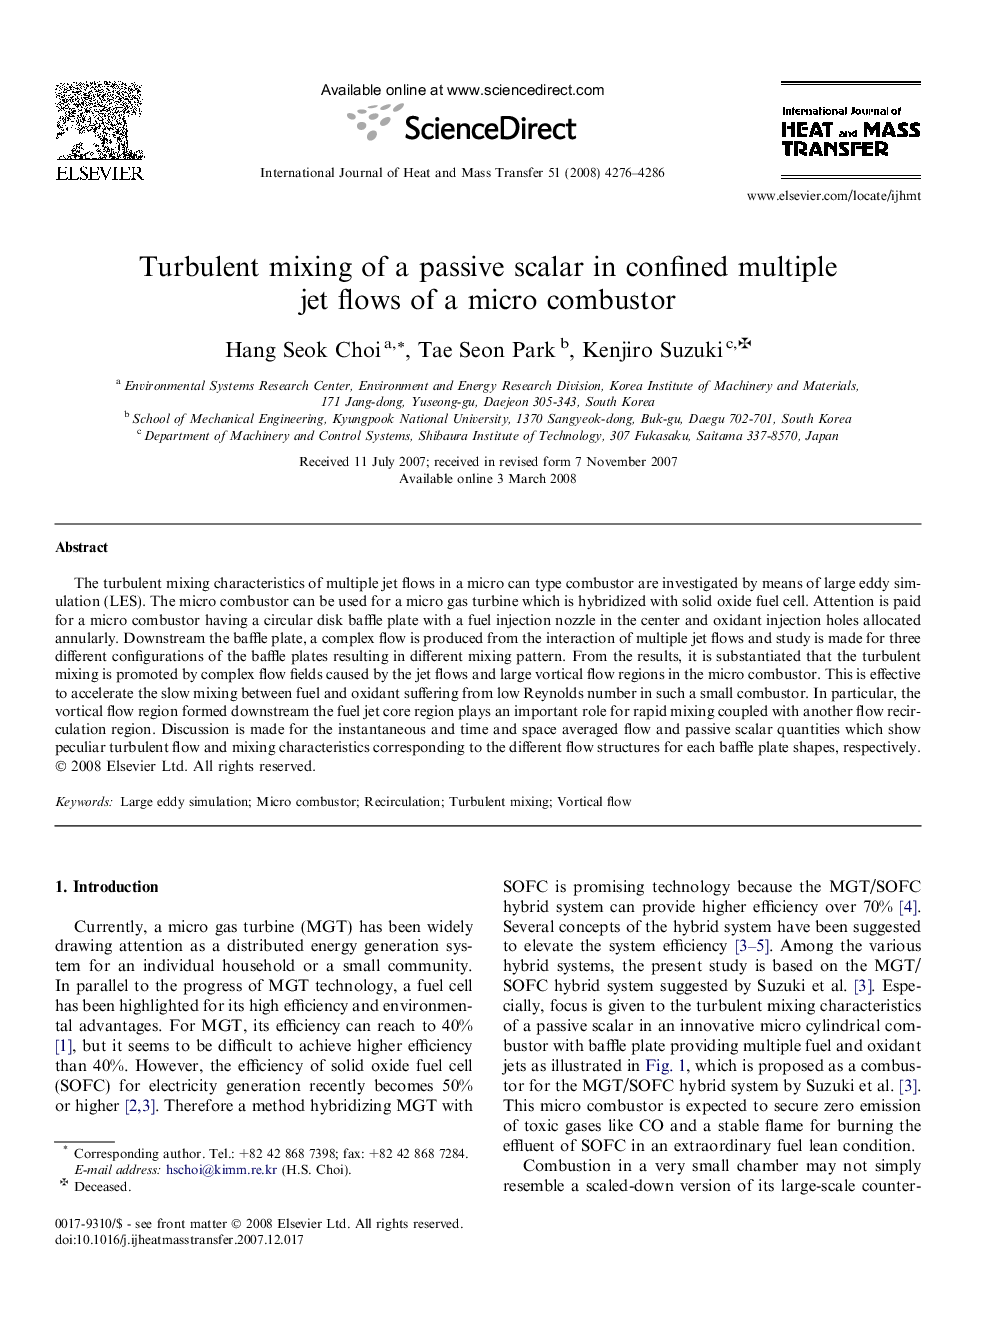 Turbulent mixing of a passive scalar in confined multiple jet flows of a micro combustor